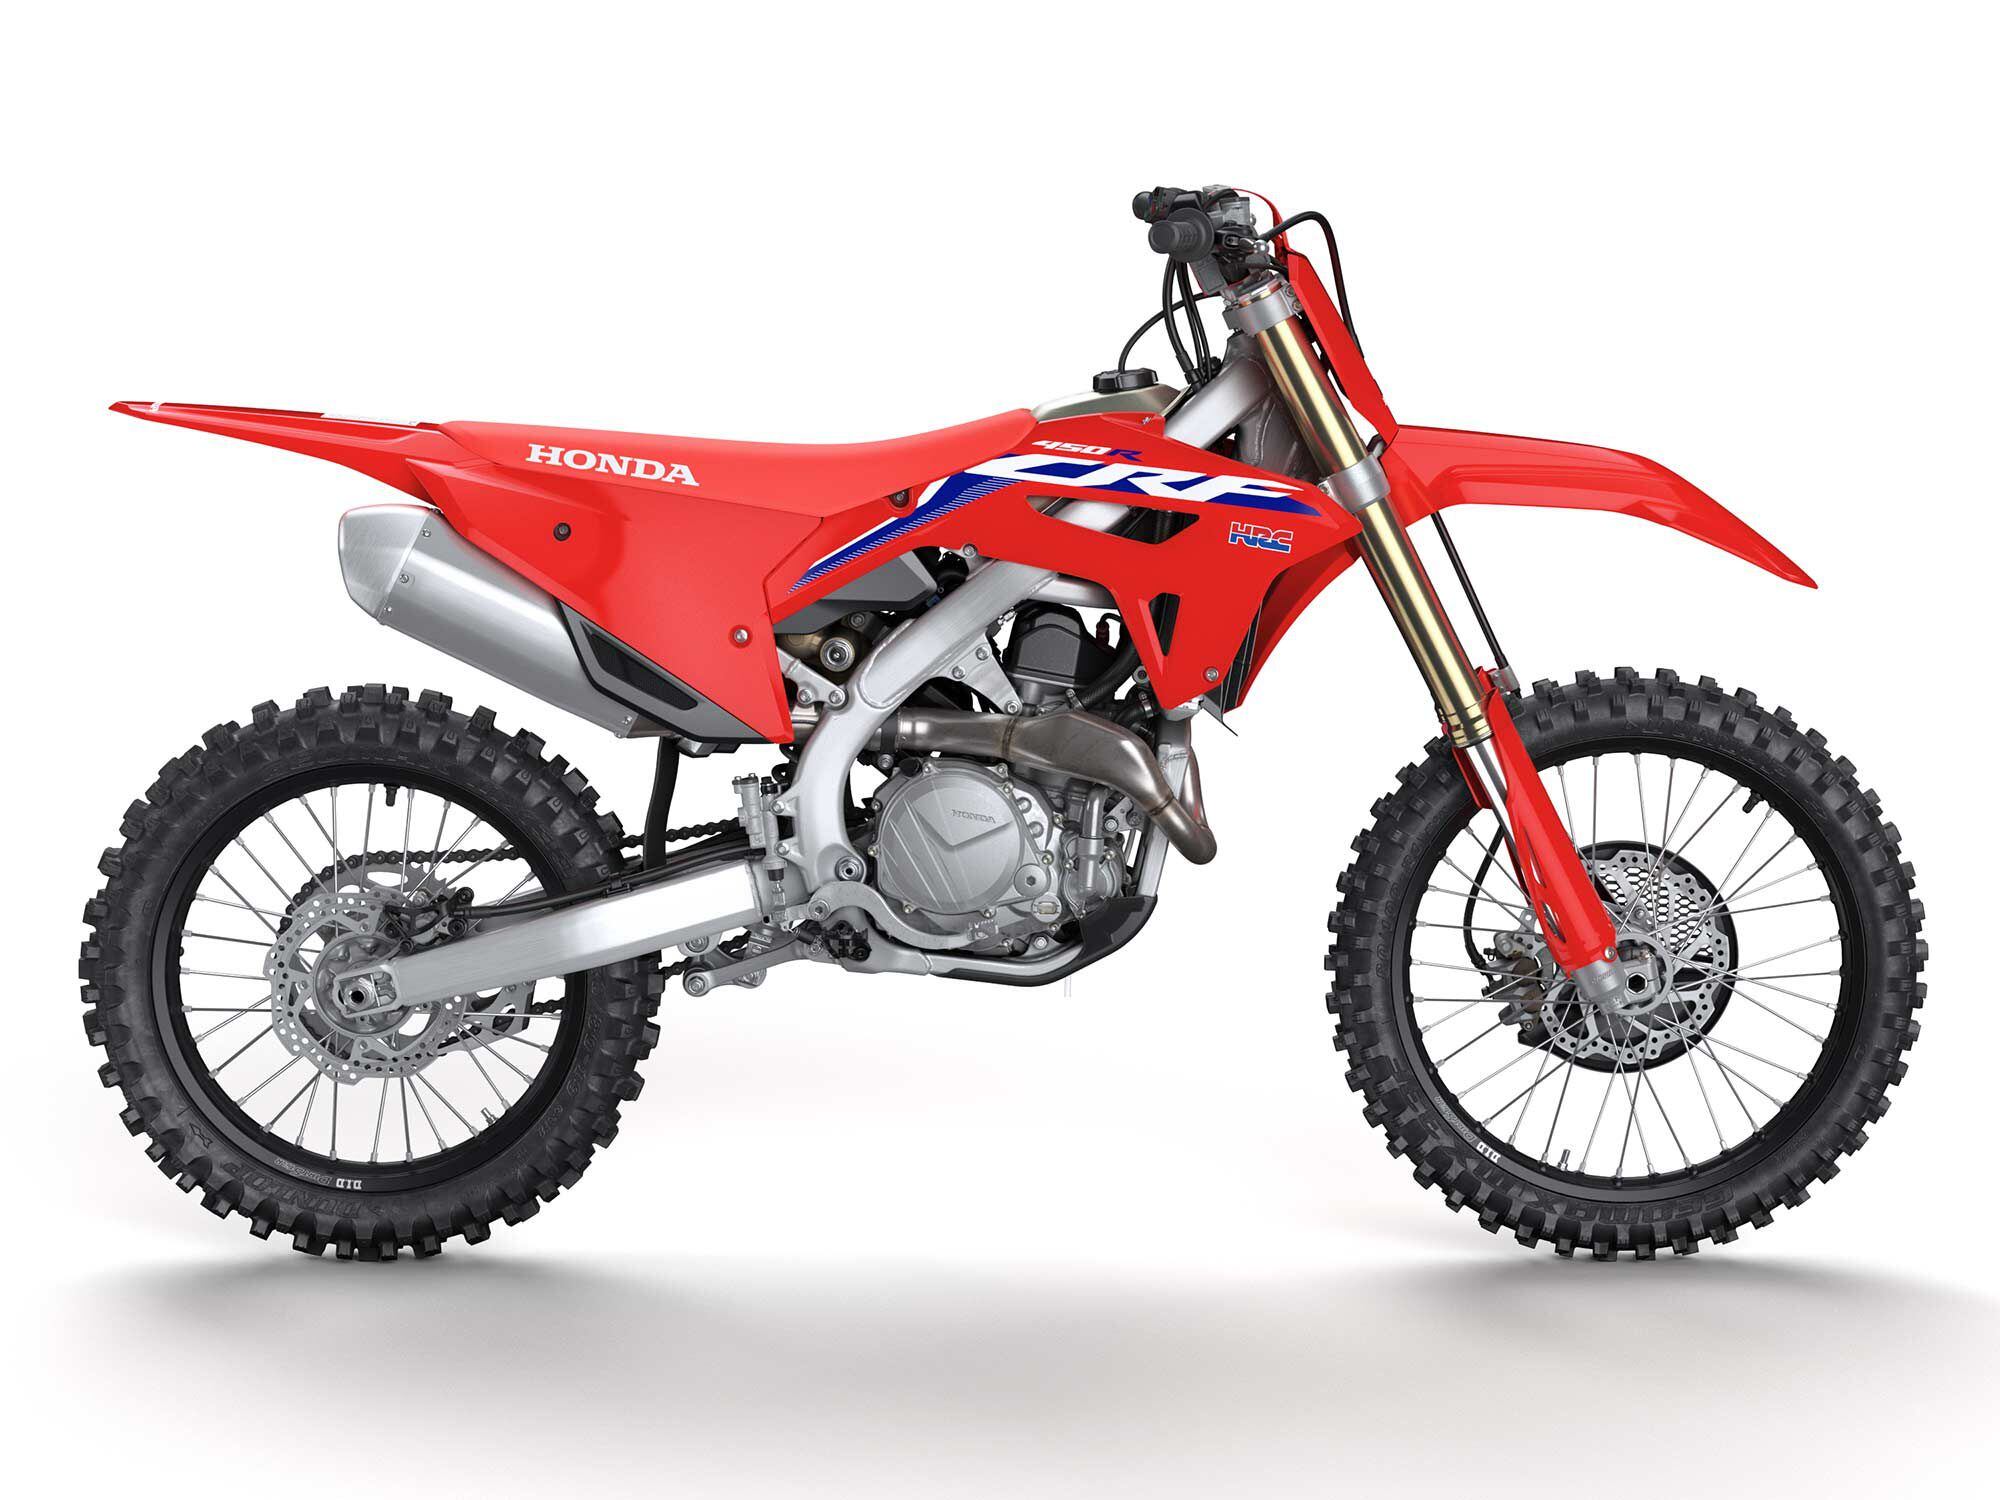 In addition to the CRF450R (pictured), Honda also offers a special-edition version of its 450 motocross bike called the CRF450RWE.